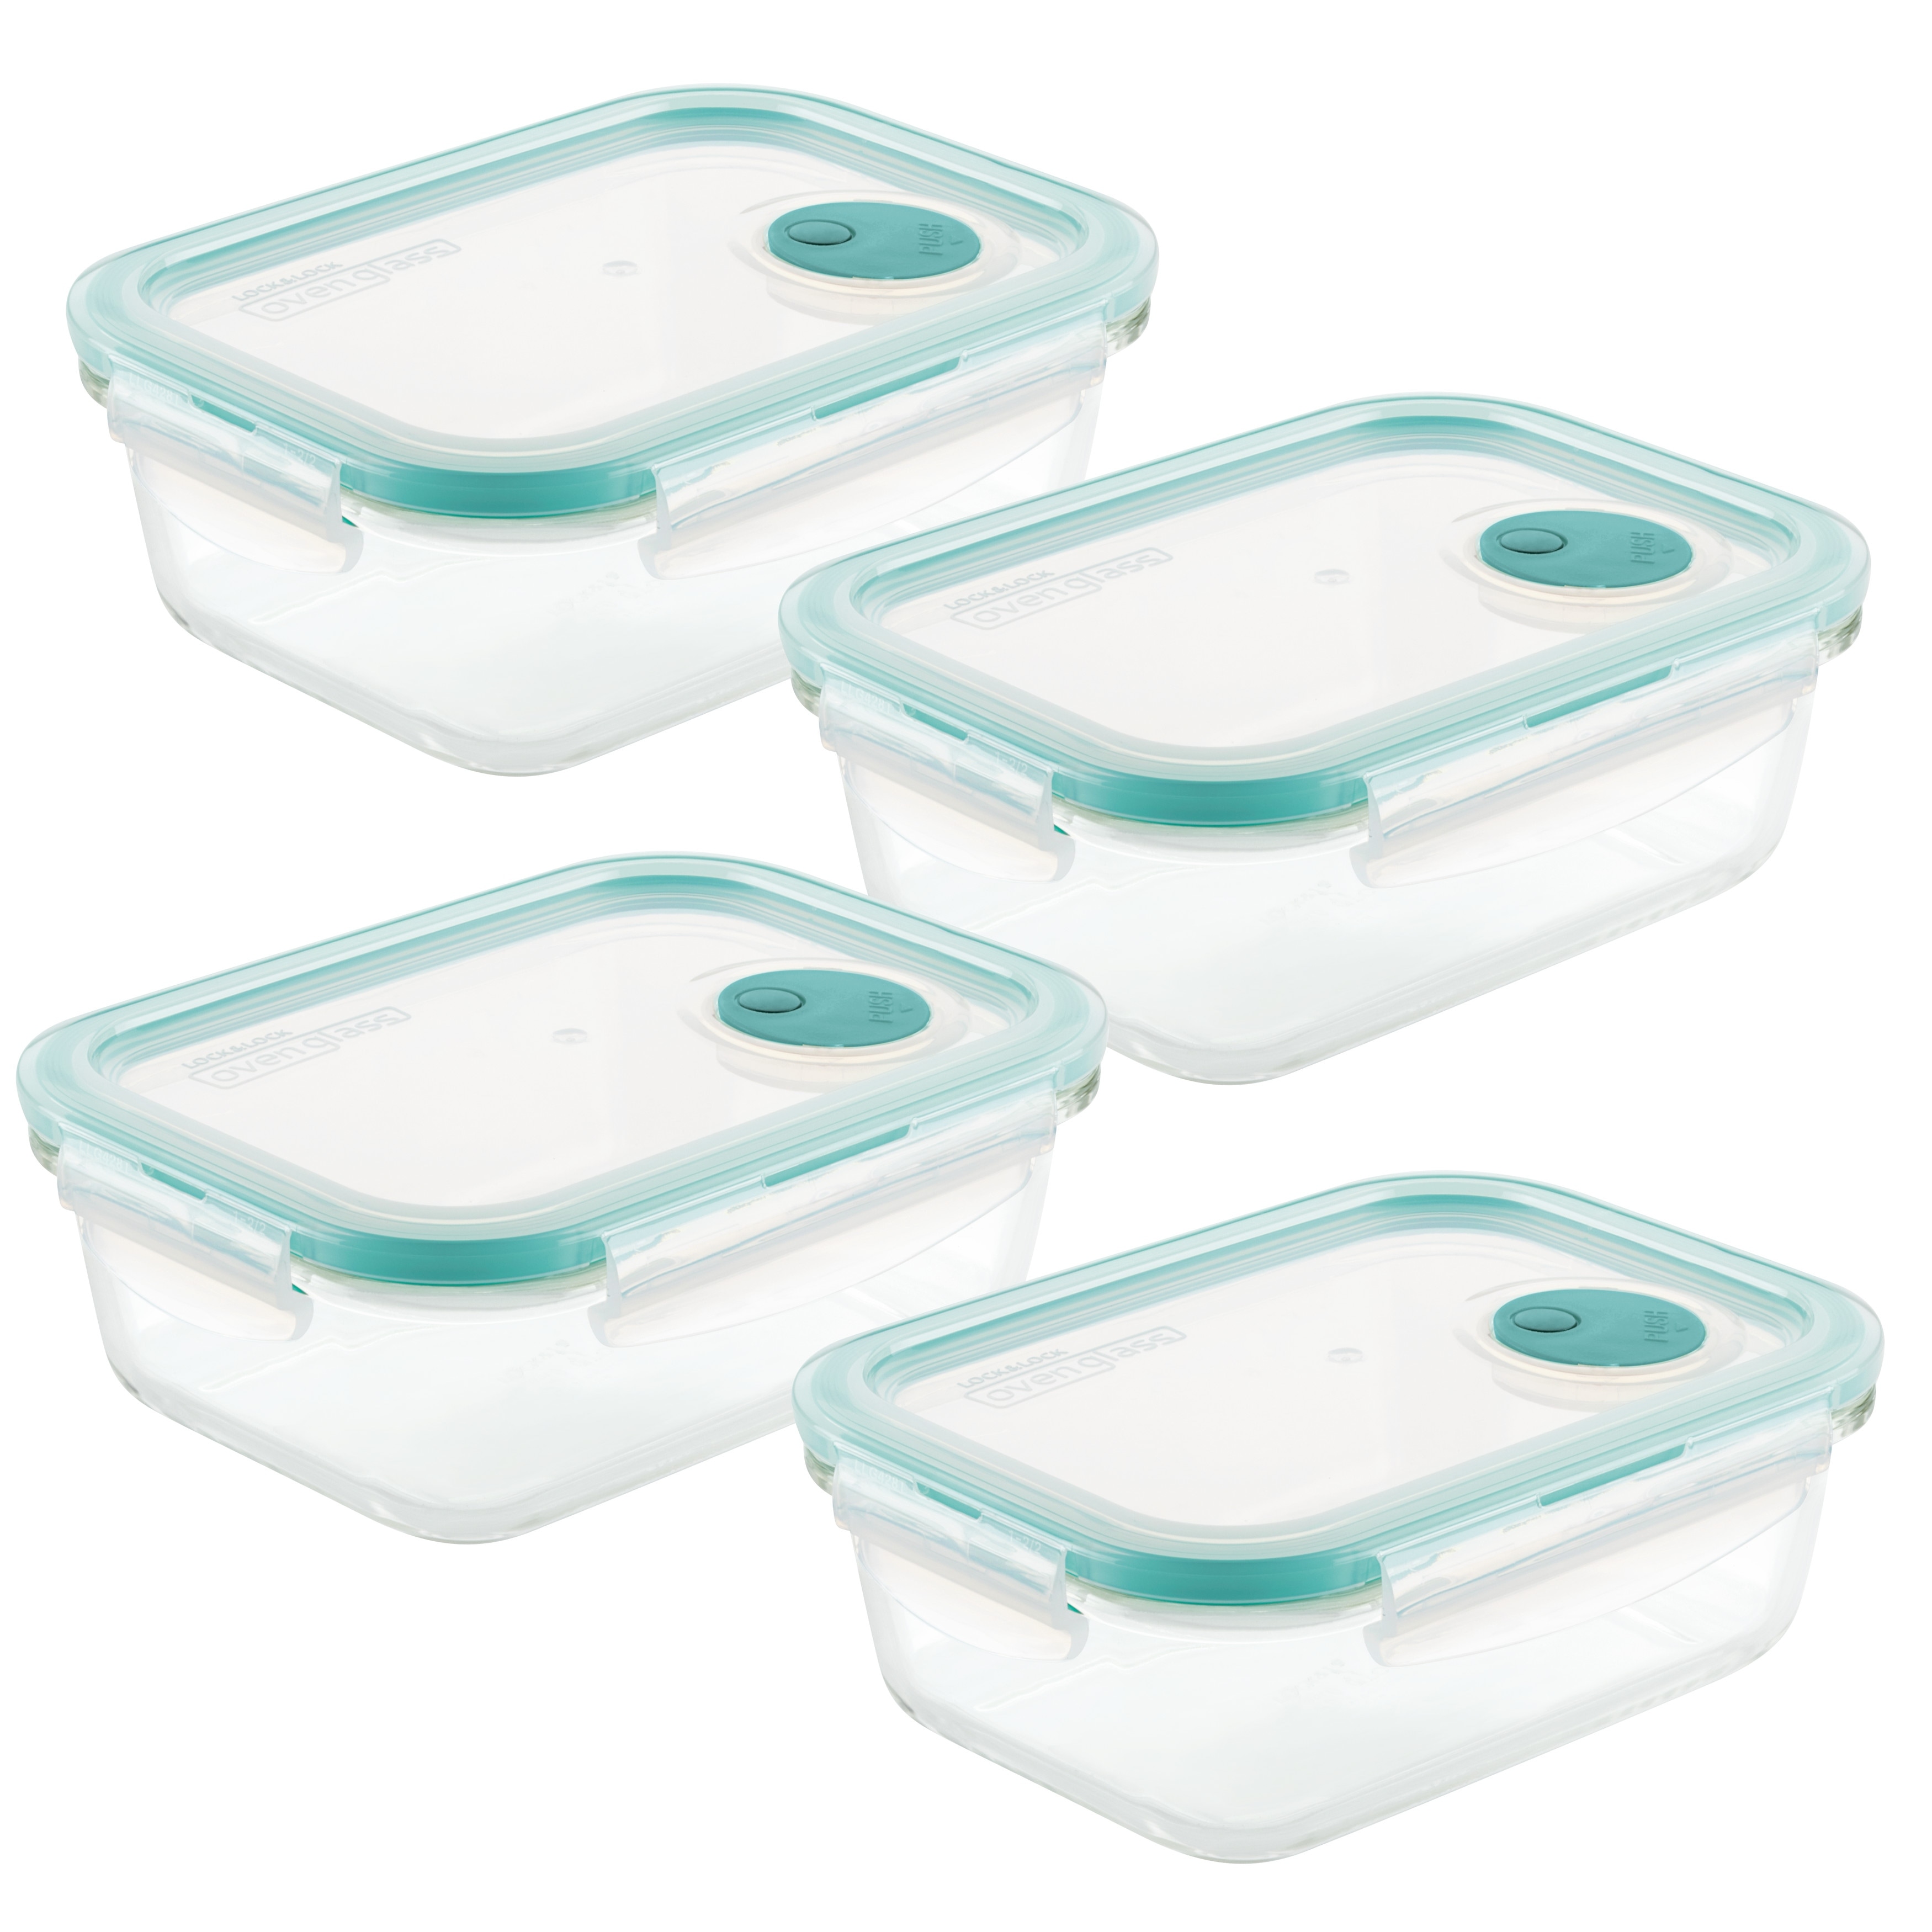 https://ak1.ostkcdn.com/images/products/is/images/direct/8d8a1b705e7d2a7625b85fe9d6bd21509ffdc0a5/LocknLock-Purely-Better-Vented-Glass-Food-Storage-Containers%2C-21-Ounce%2C-Set-of-Four.jpg